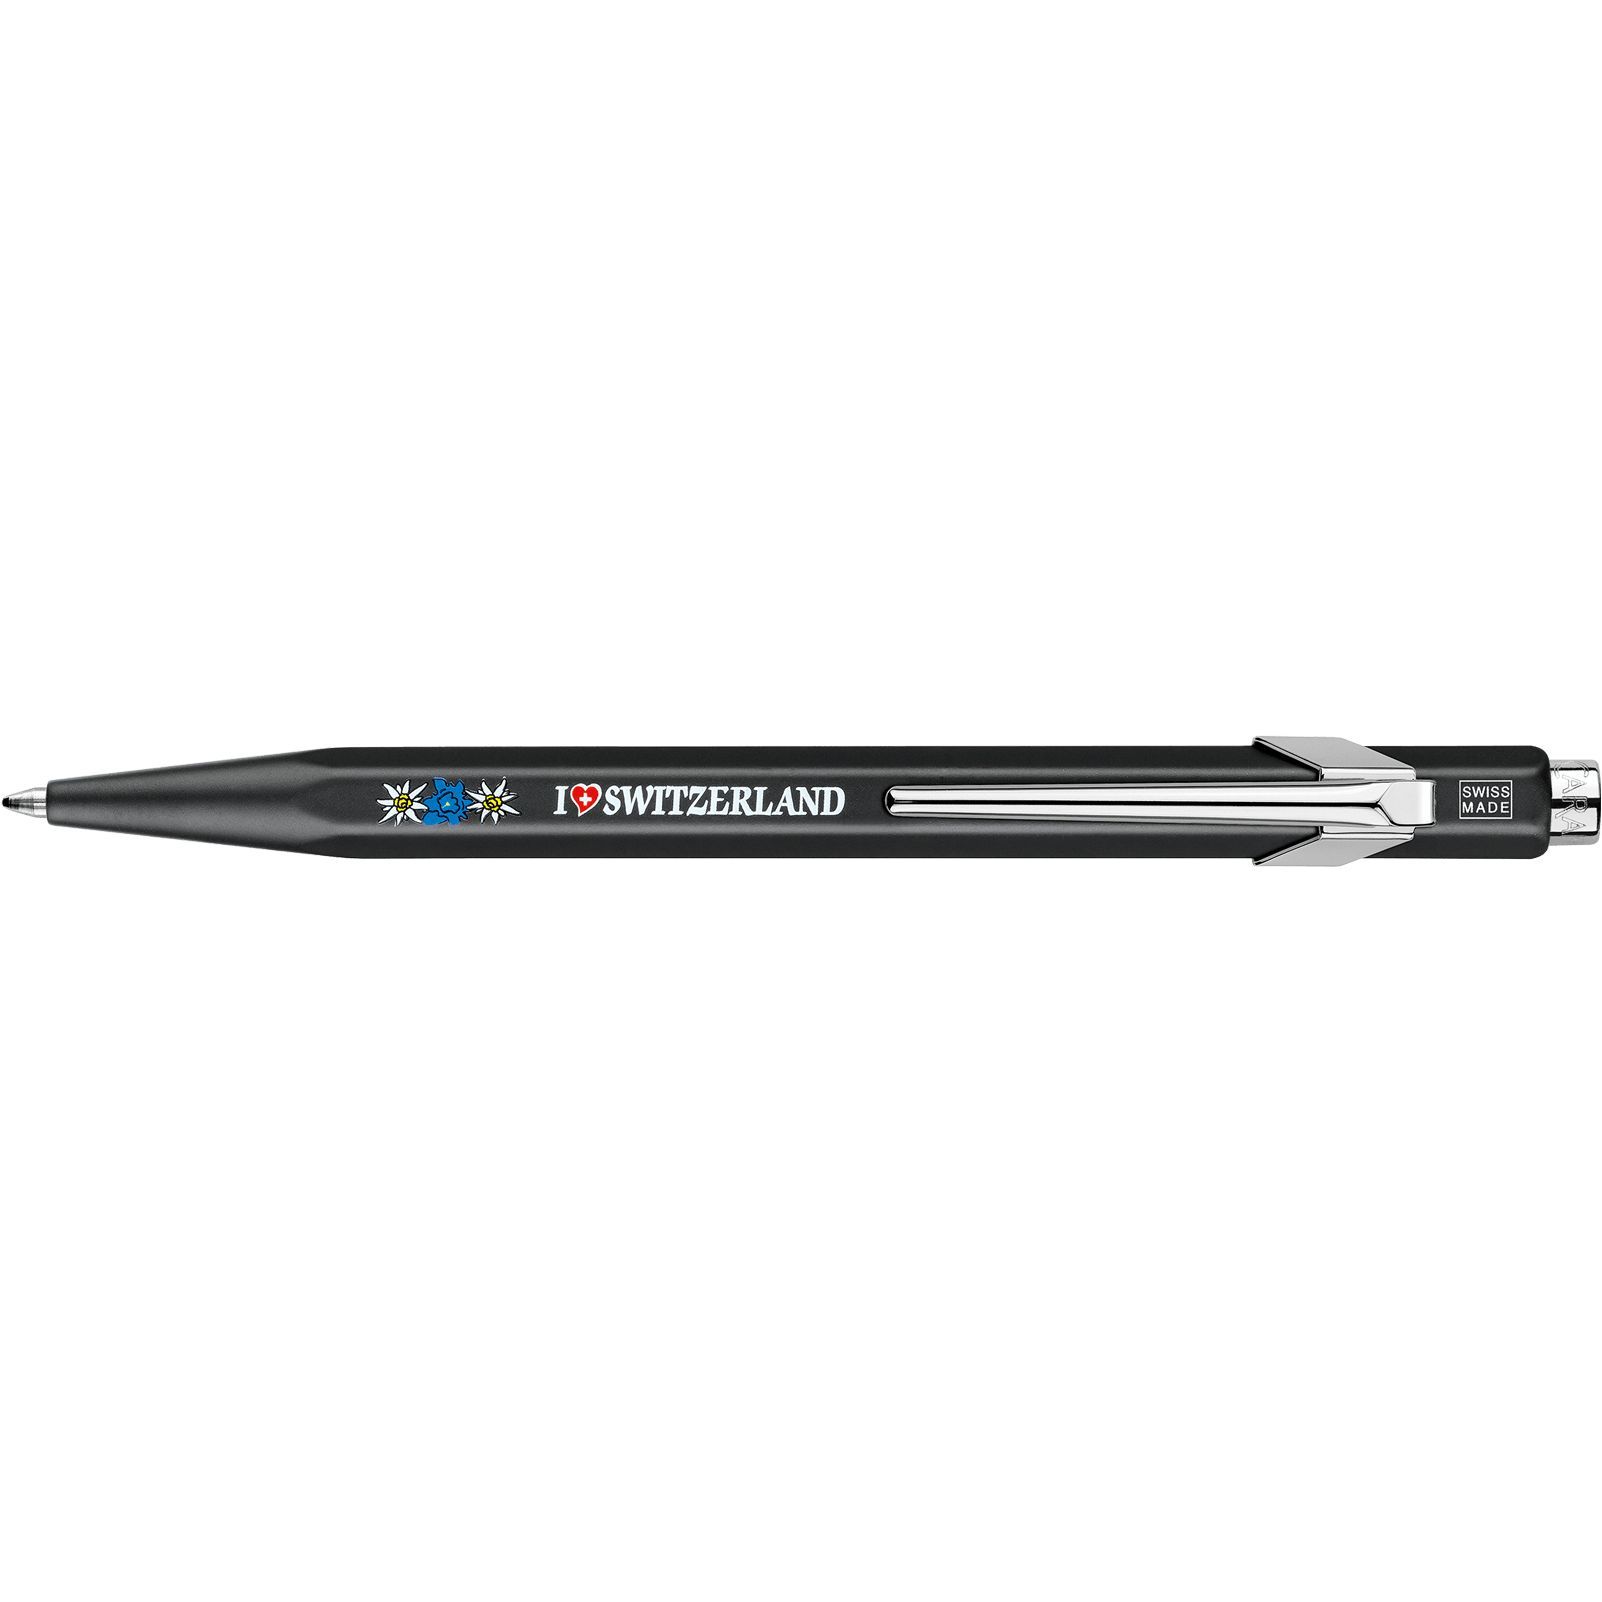 Caran d'Ache Popline Totally Swiss Collection with Tin Giftbox - Edelweiss Black